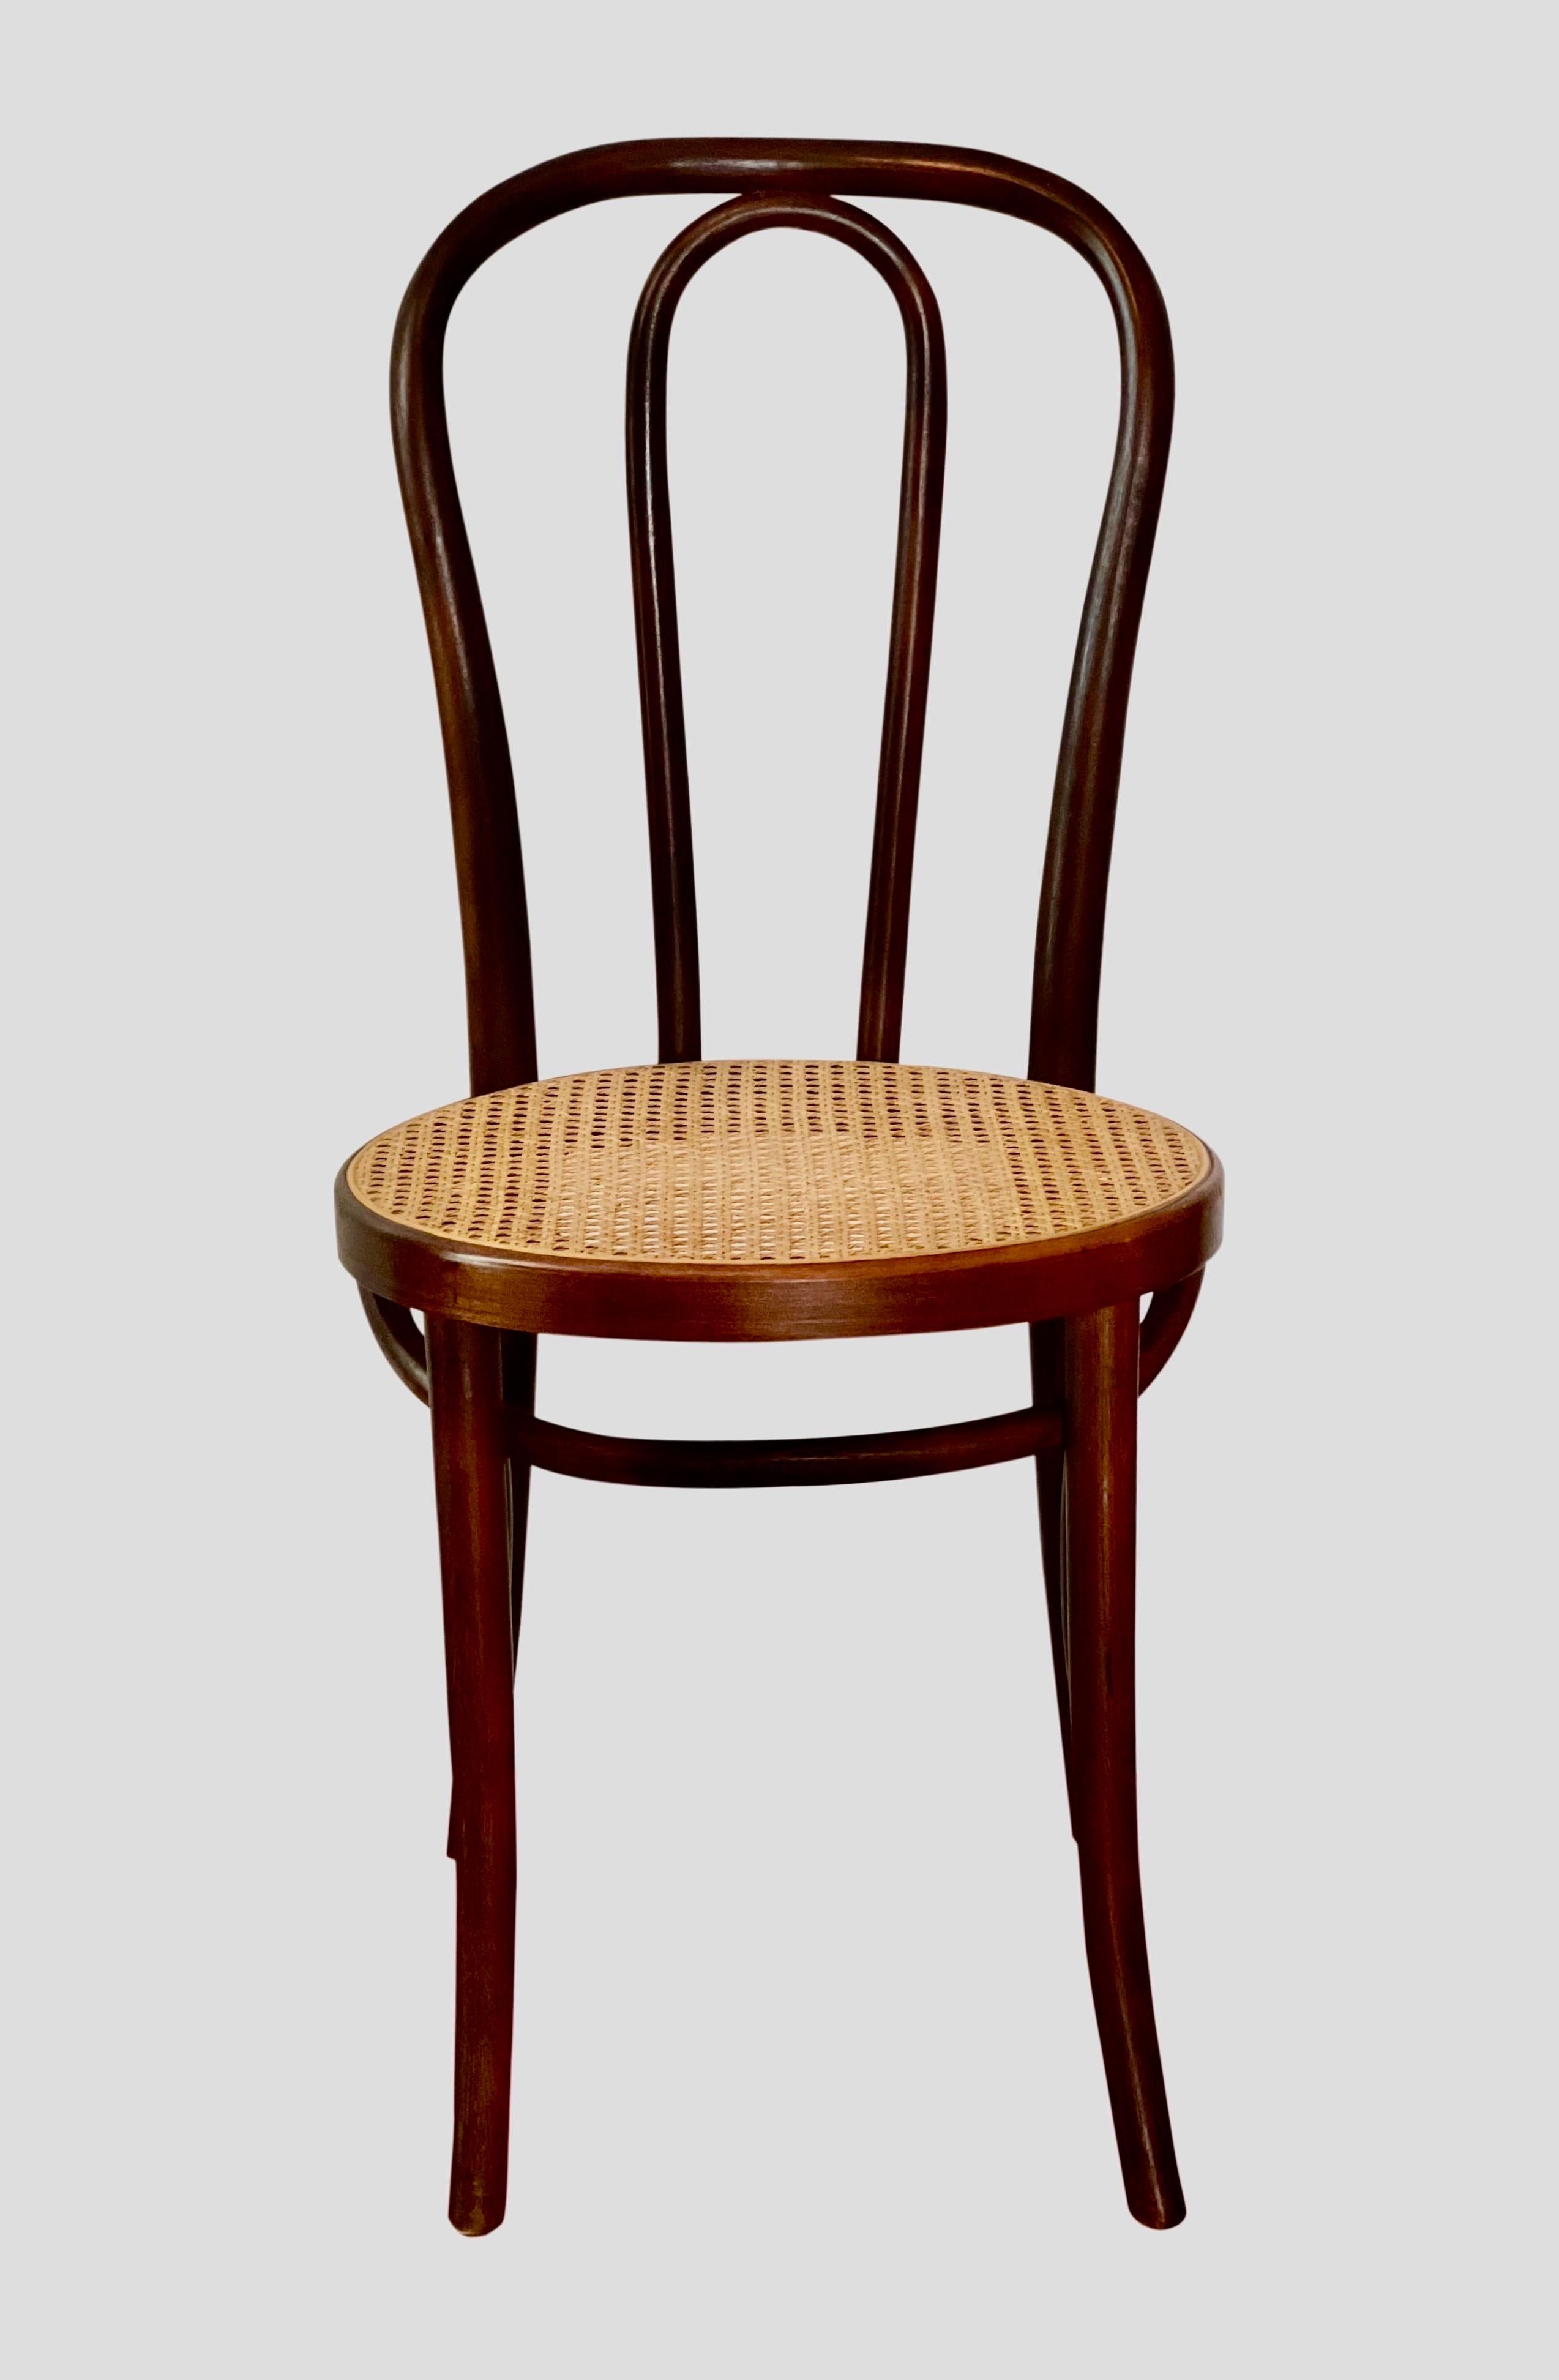 Thonet bentwood cane cafe or side chair, 1920's

This iconic design chair has a sturdy yet lightweight beechwood frame. An original classic great for a variety of settings. It is stamped on the bottom. Both the cane and bentwood frame are in very